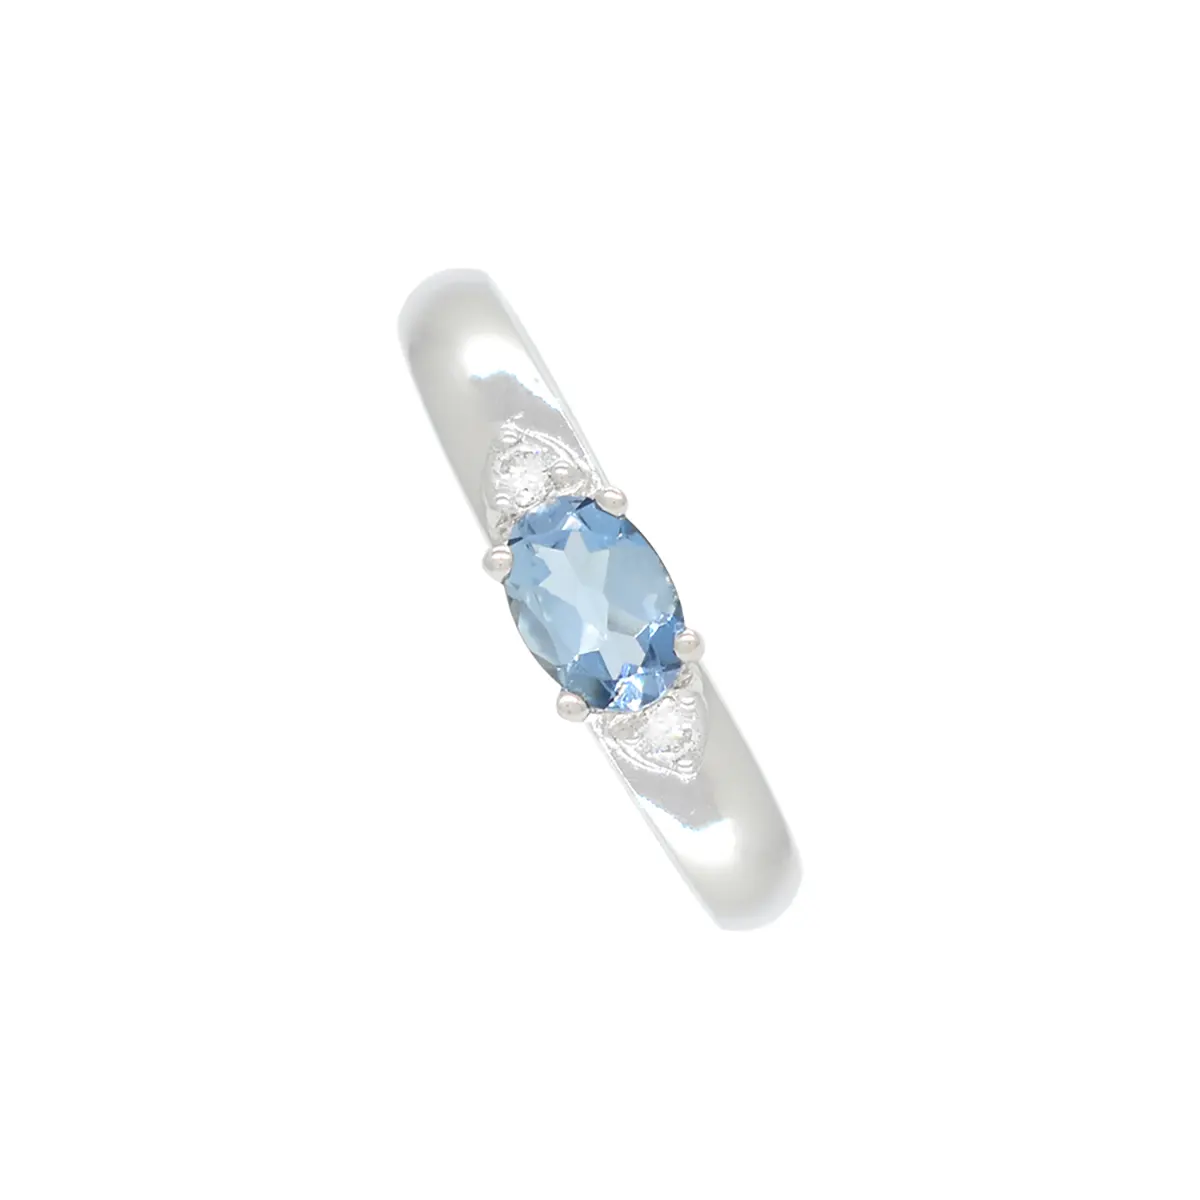 East West 3 Stones Aquamarine and Diamond Ring in 18K White Gold